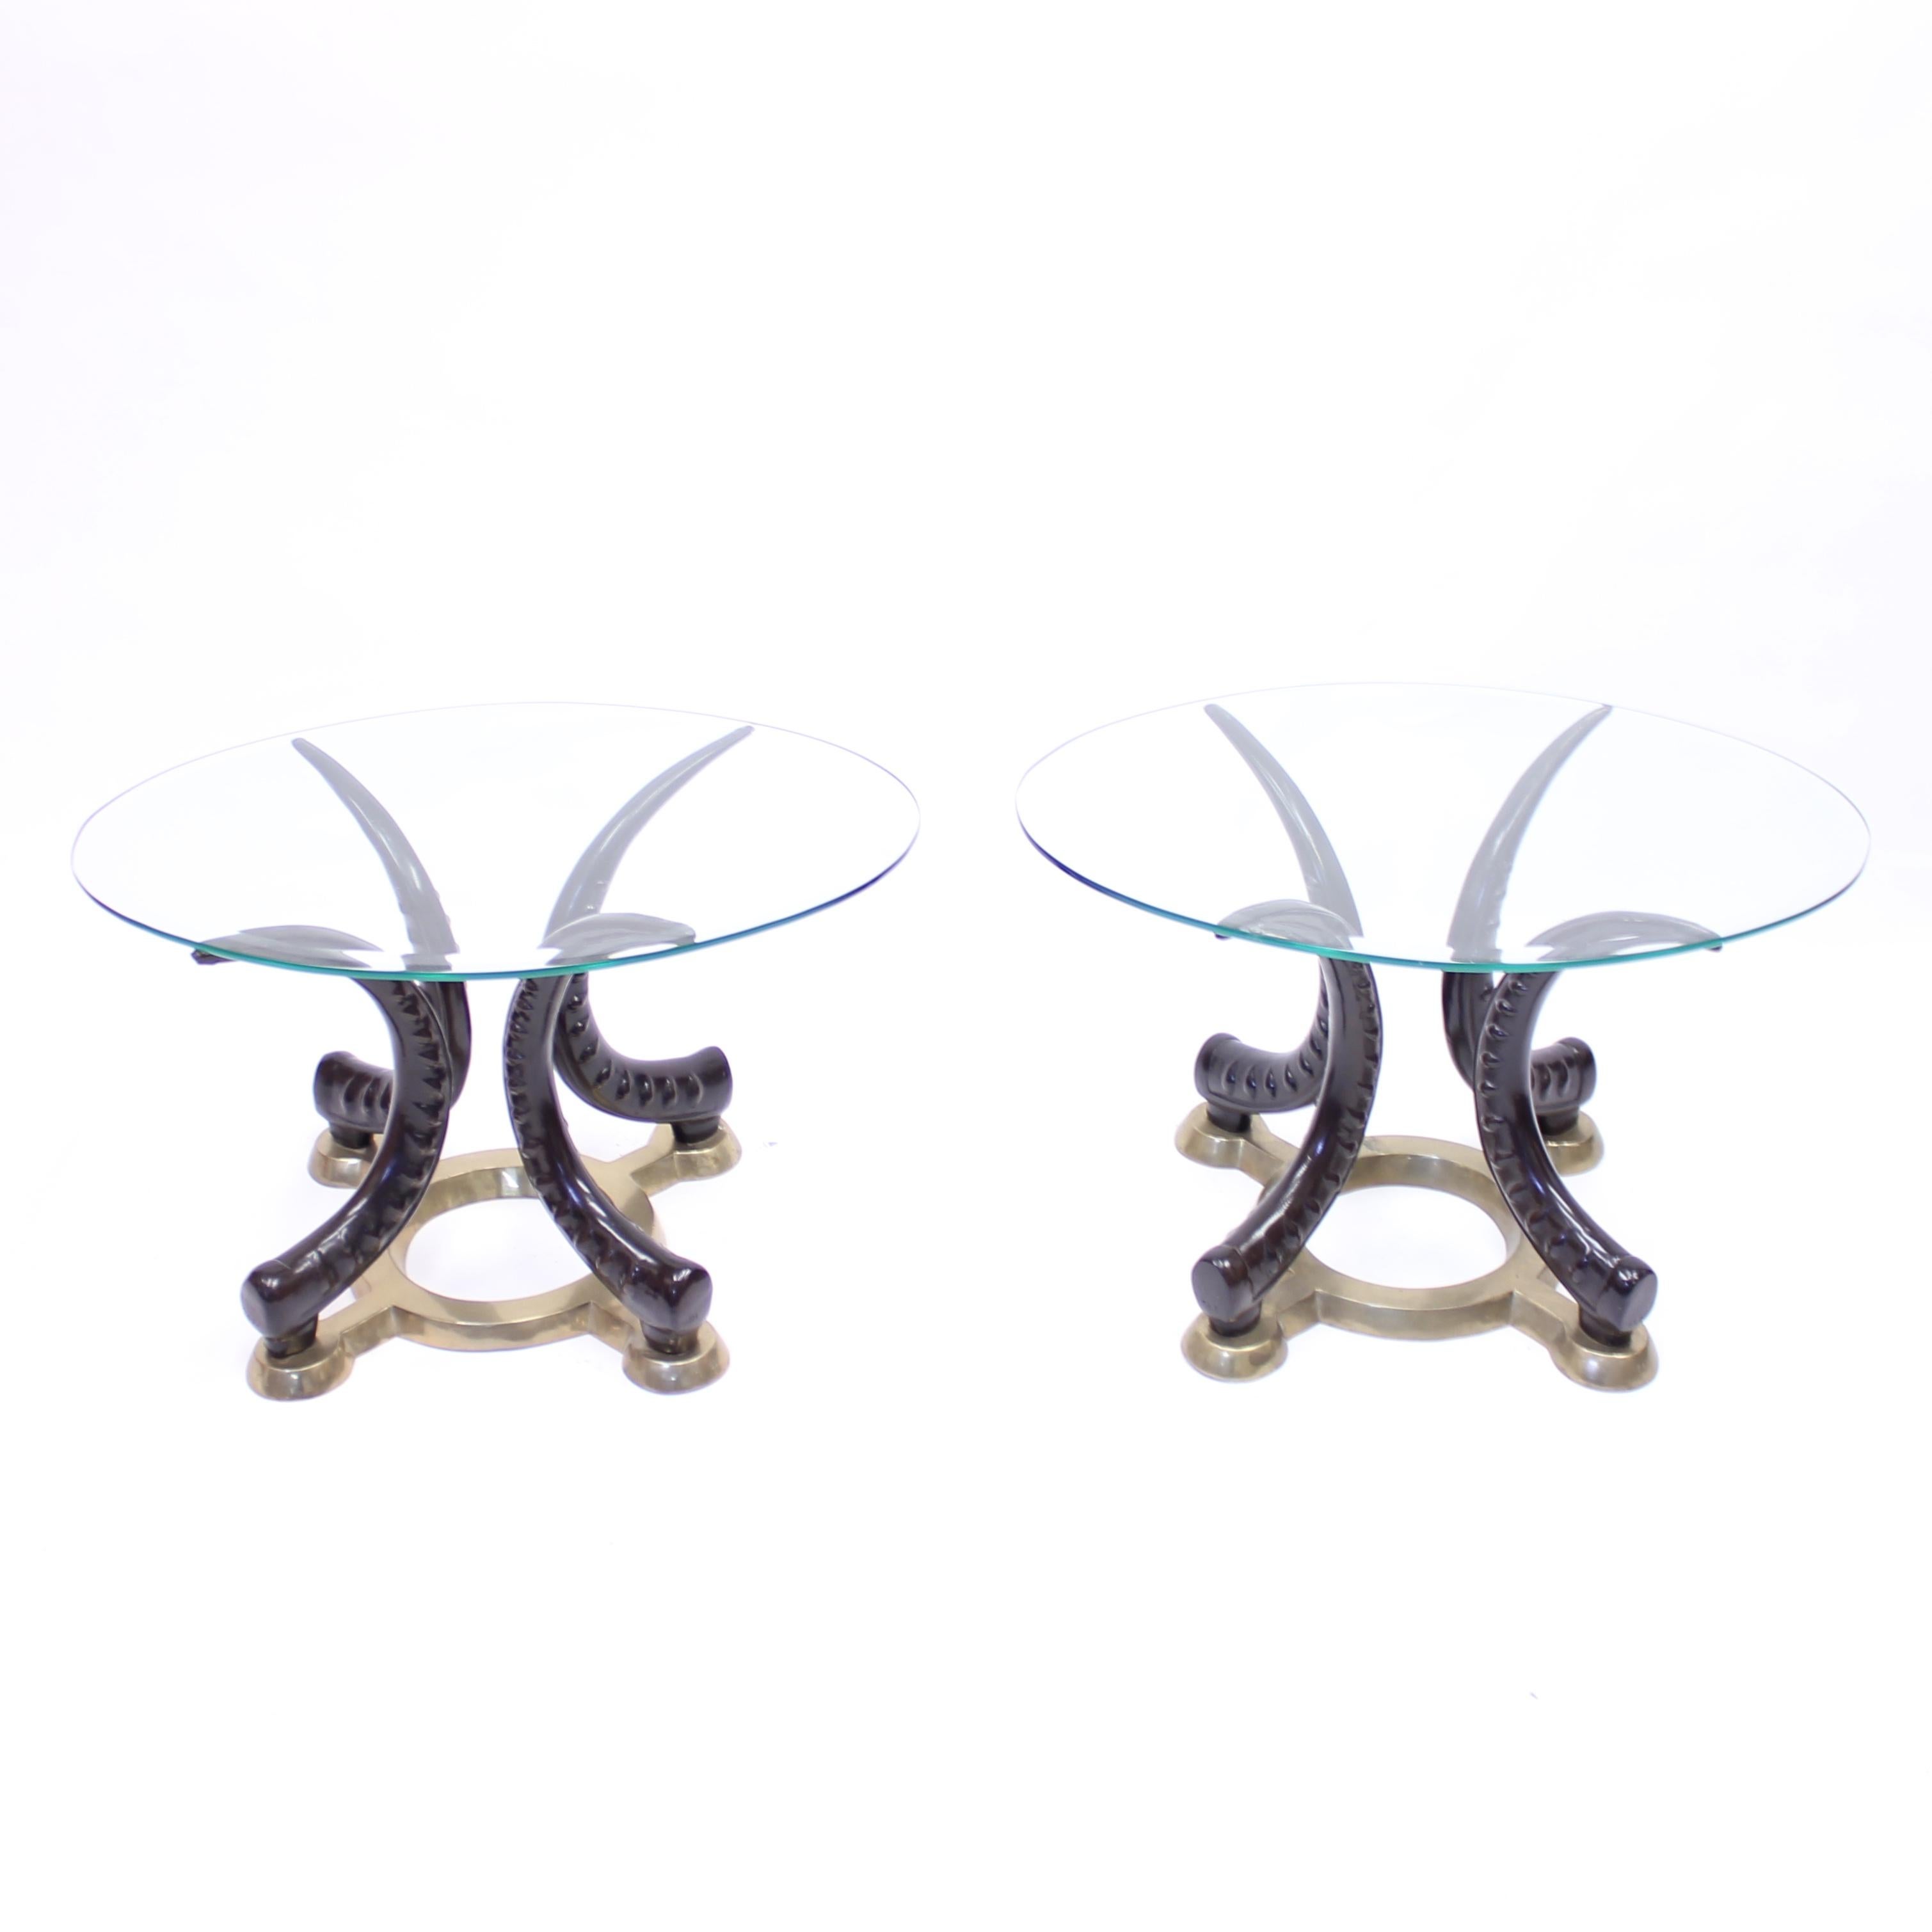 Pair of eclectic vintage brass and faux tusks side or lamp tables with oval glass tops from the 1970s or 1980s. Possibly Italian or French in origin. Round brass base with round leg holders on the outside. The faux tusk brass legs are painted to